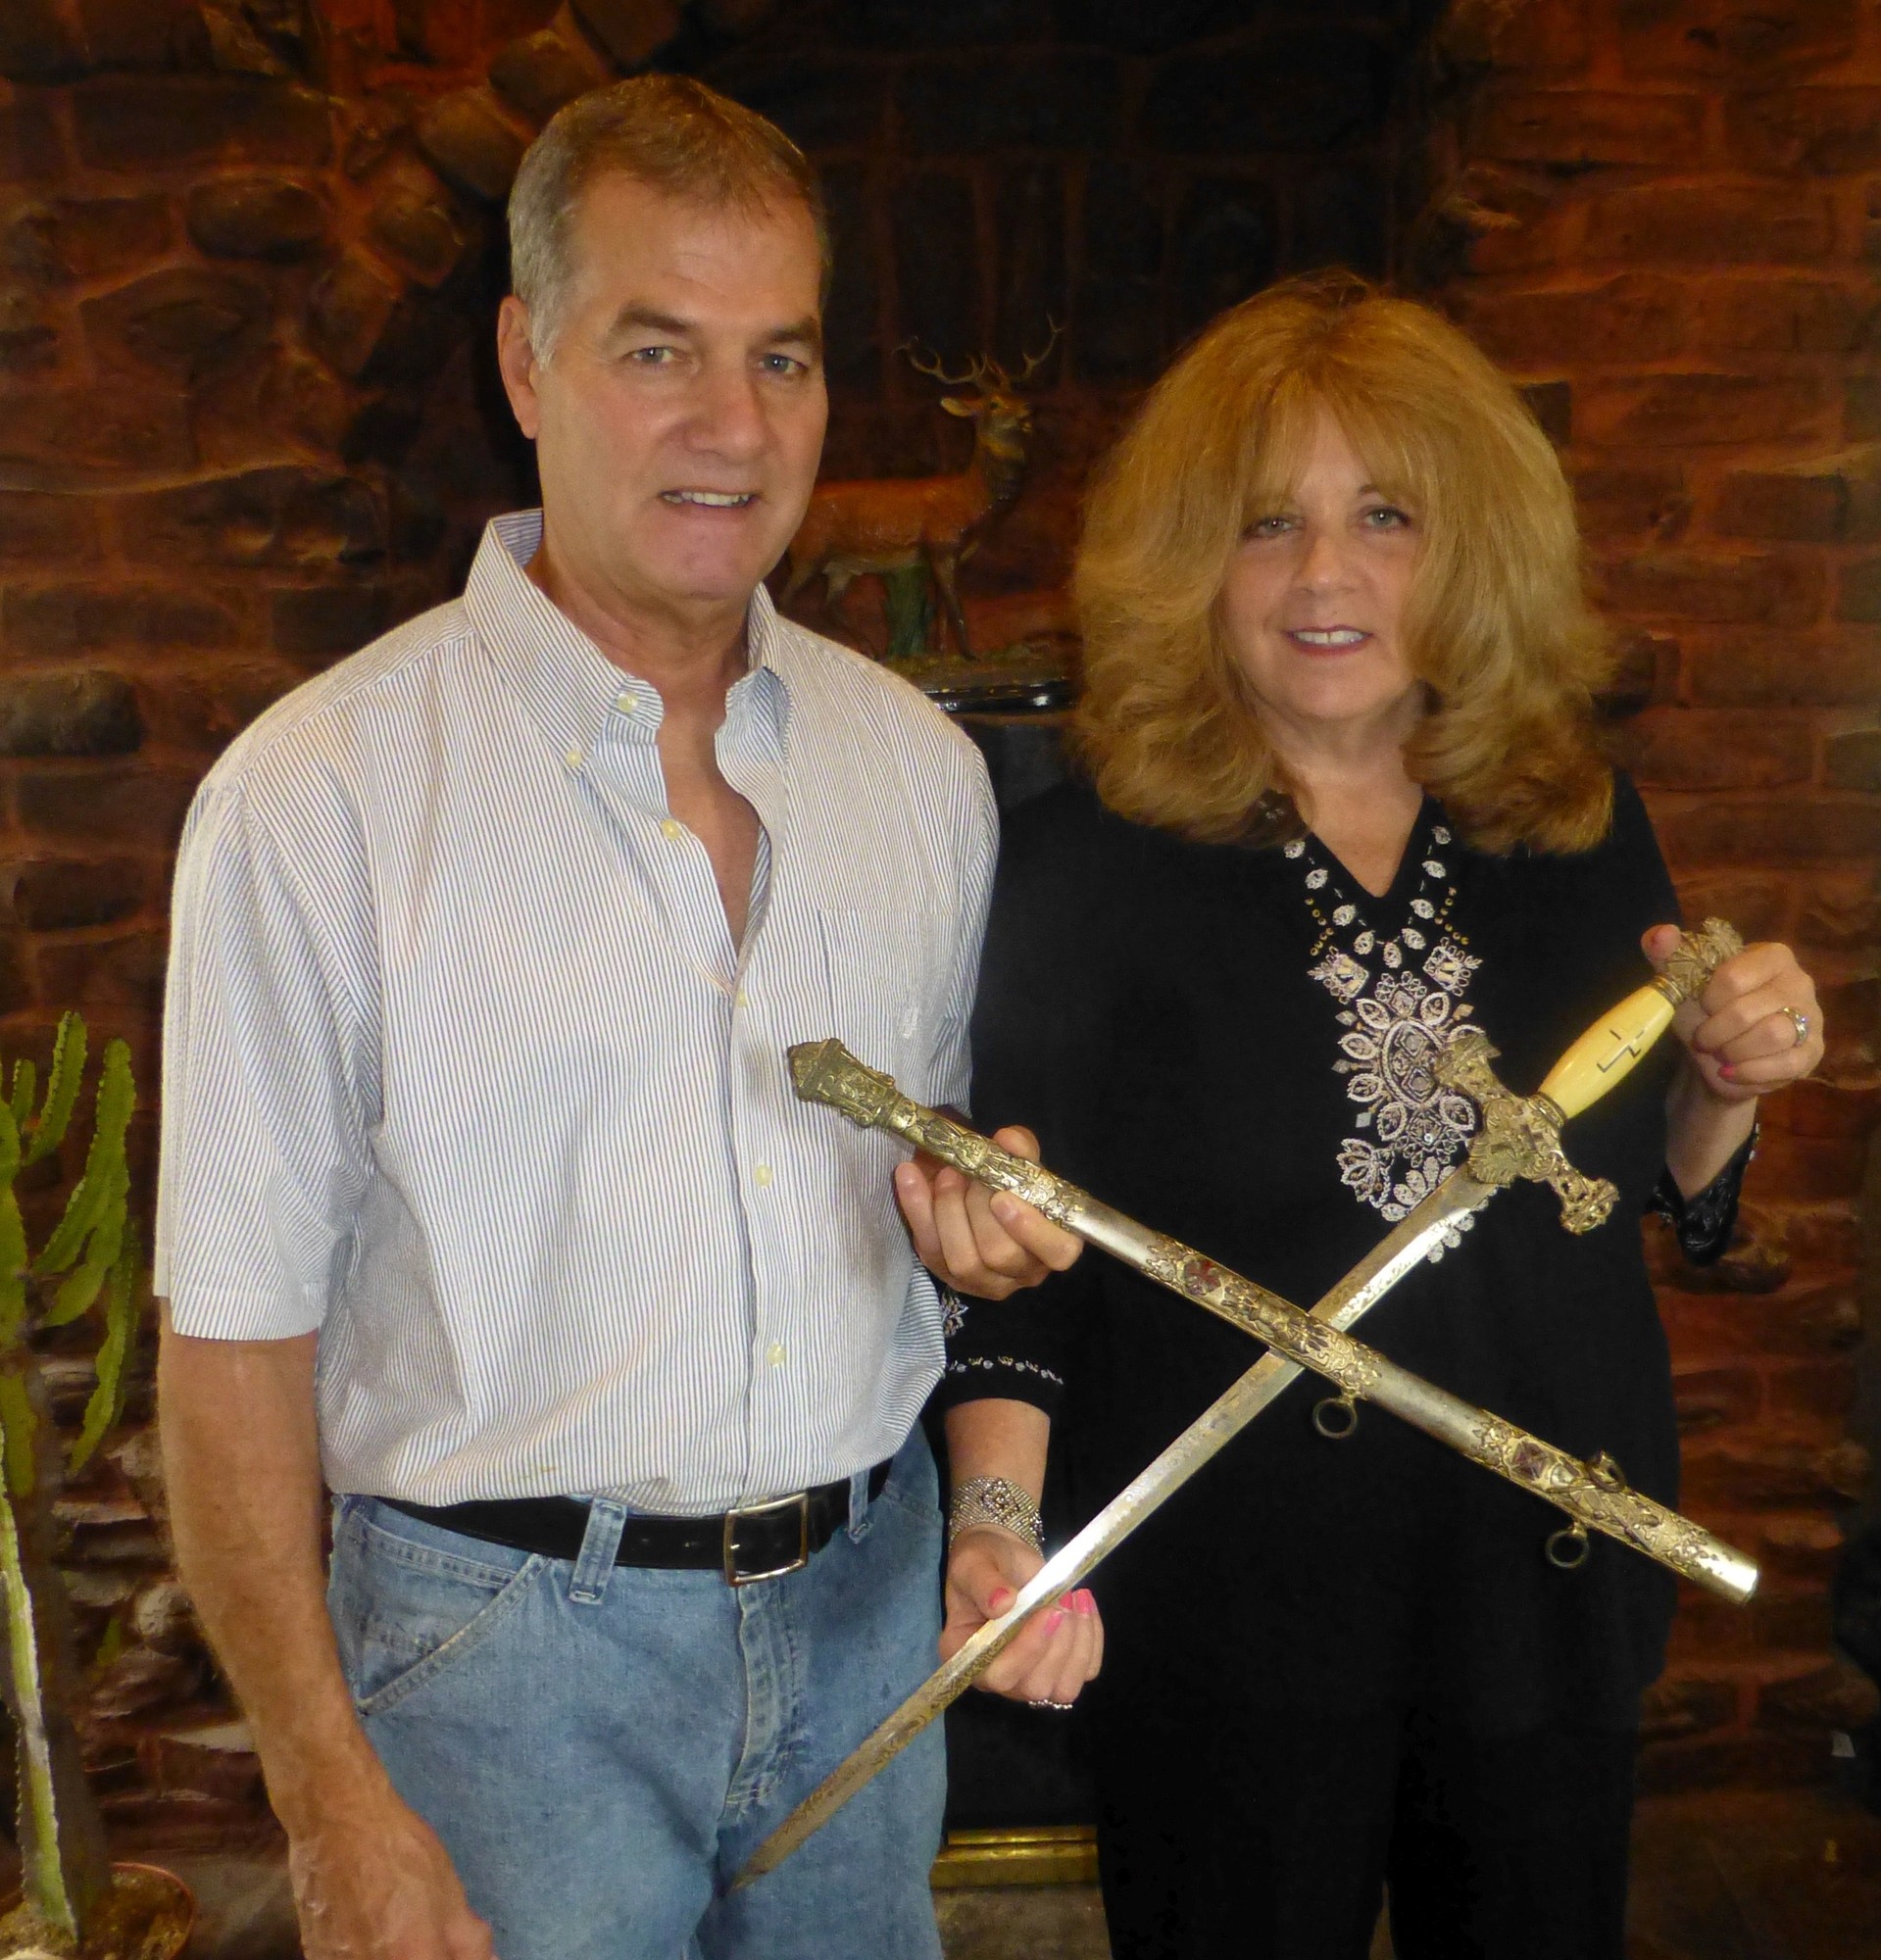 Alan  Arias and and his wife, Joyce, found Harry Thridgould’s sword when they were moving.